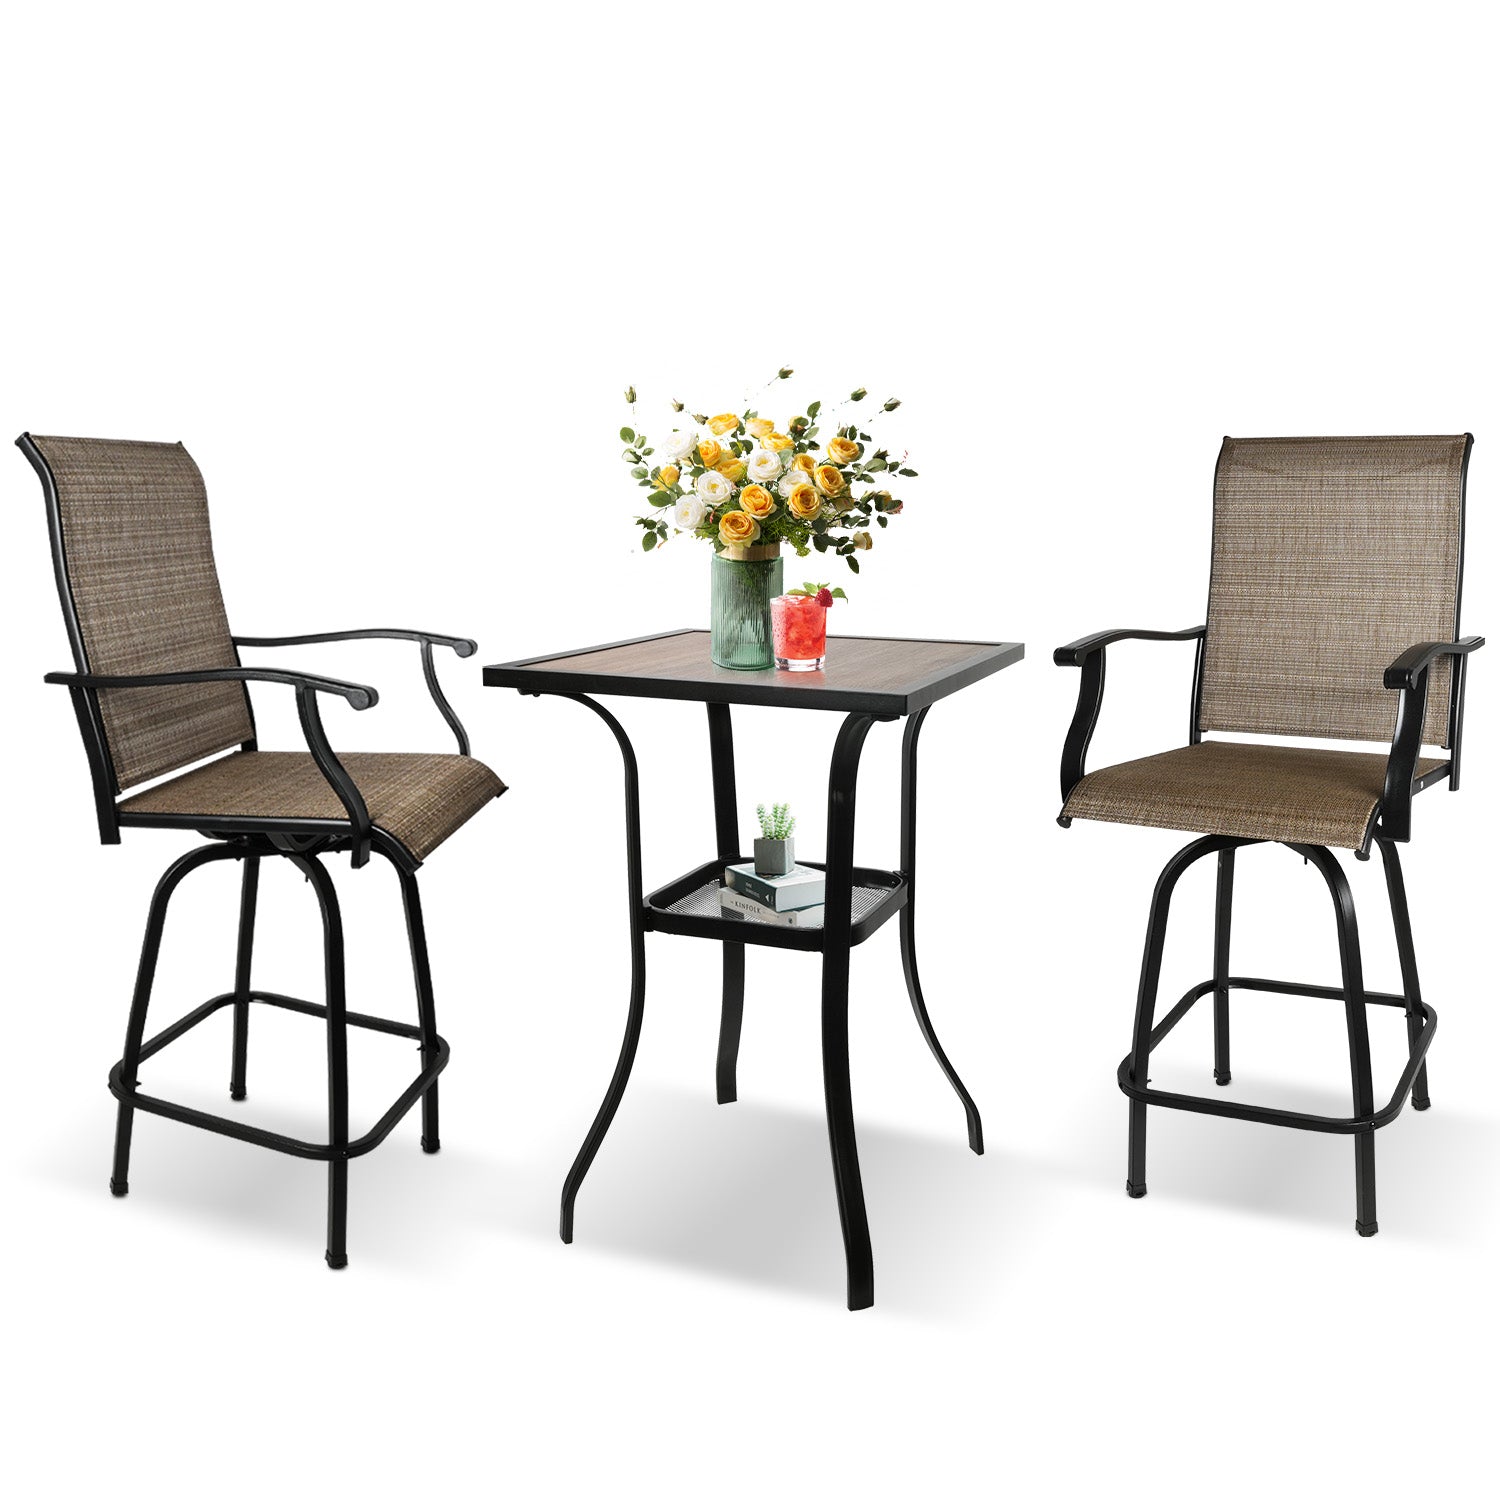 Outdoor Patio Swivel Bar Set with 2 Bar Chairs and 1 Square Table 27.5"